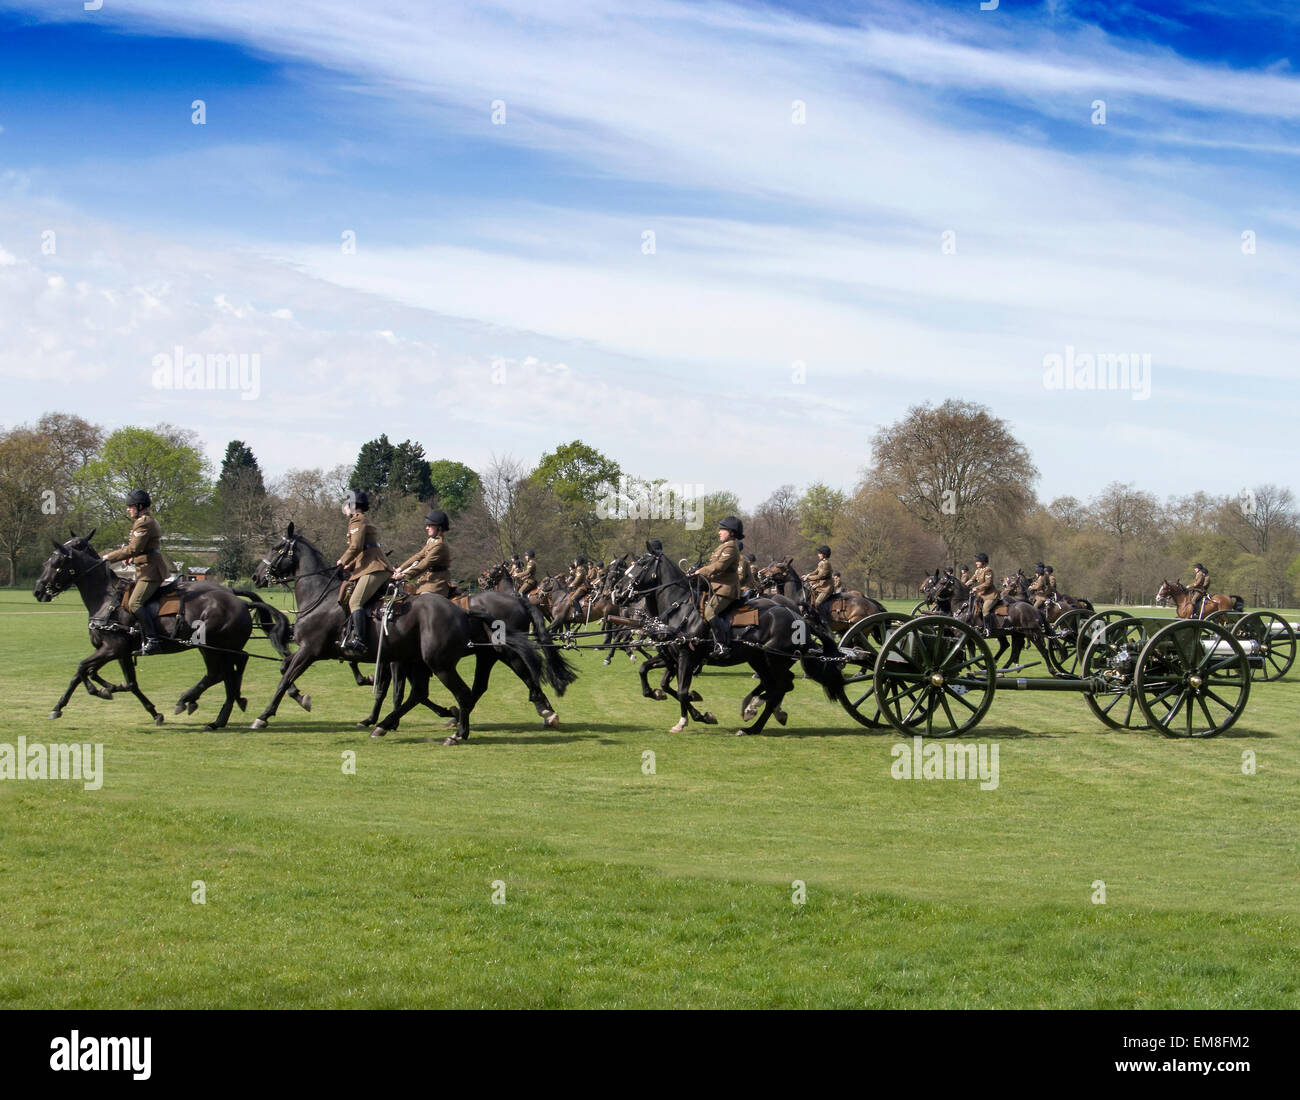 London, UK. 17th April, 2015. Royal Horse Artillery gun carrage rehearsal in Hyde Park London. Most of the gummers were women. 17/4/2015 Credit:  Martyn Goddard/Alamy Live News Stock Photo